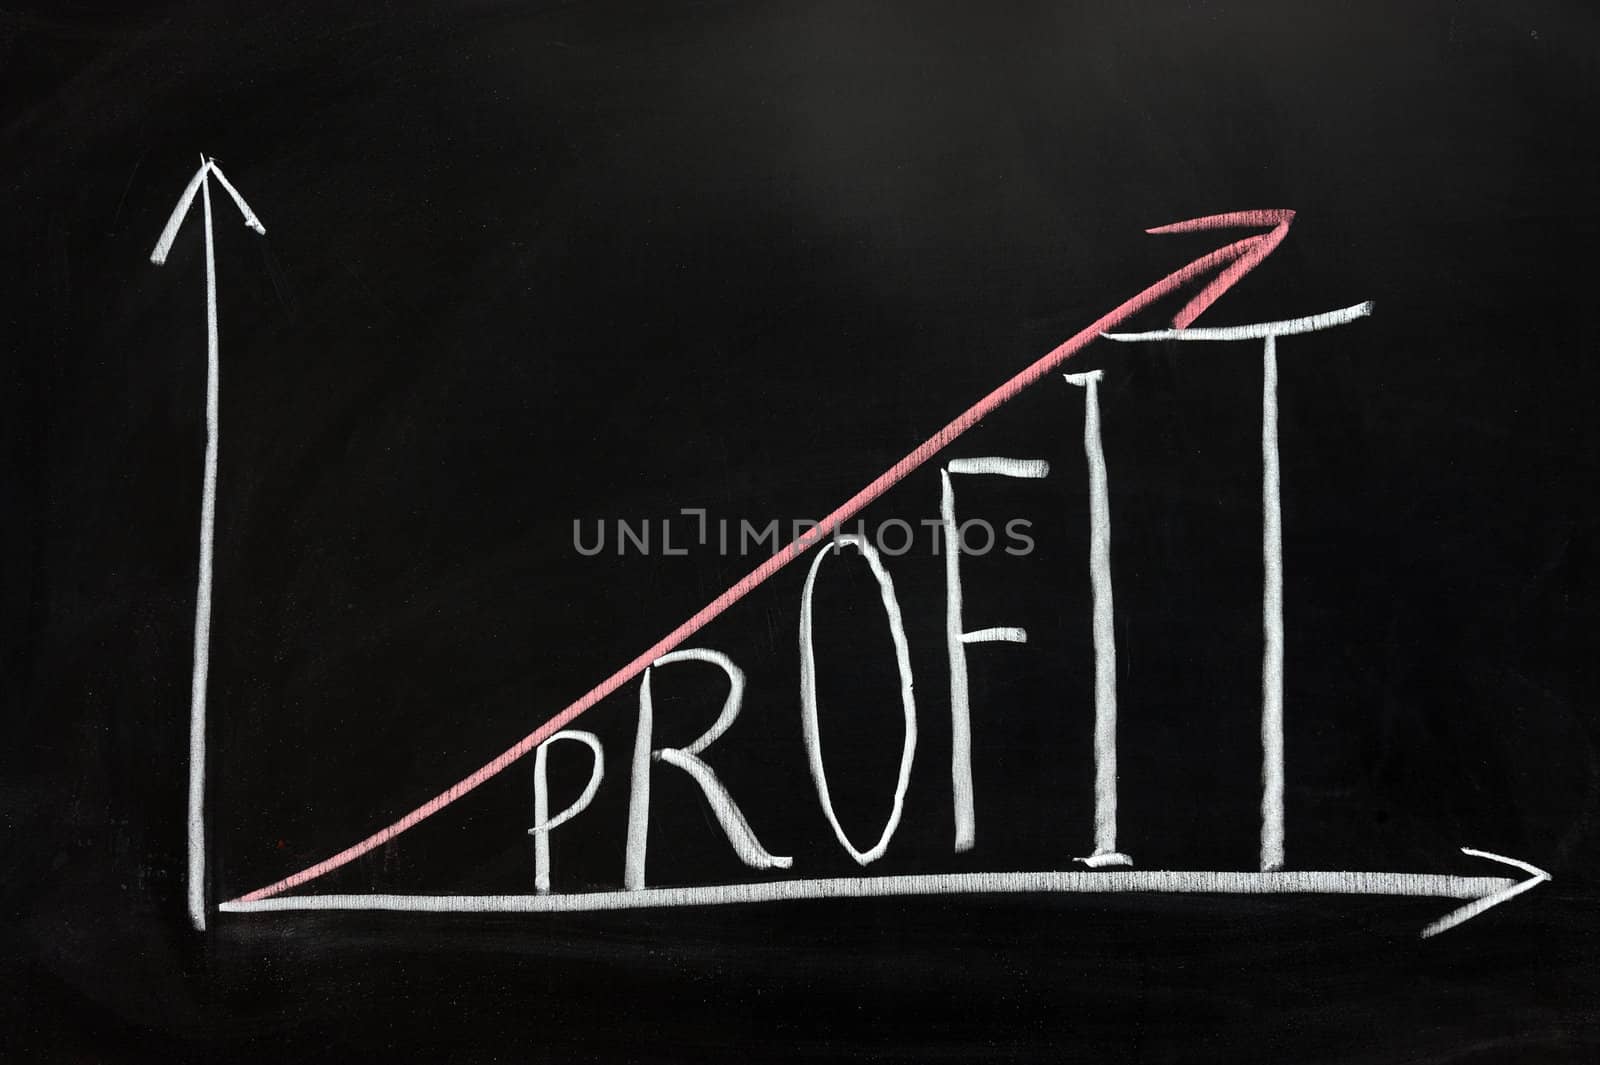 Chalk drawing - Graph of "Profit" concept